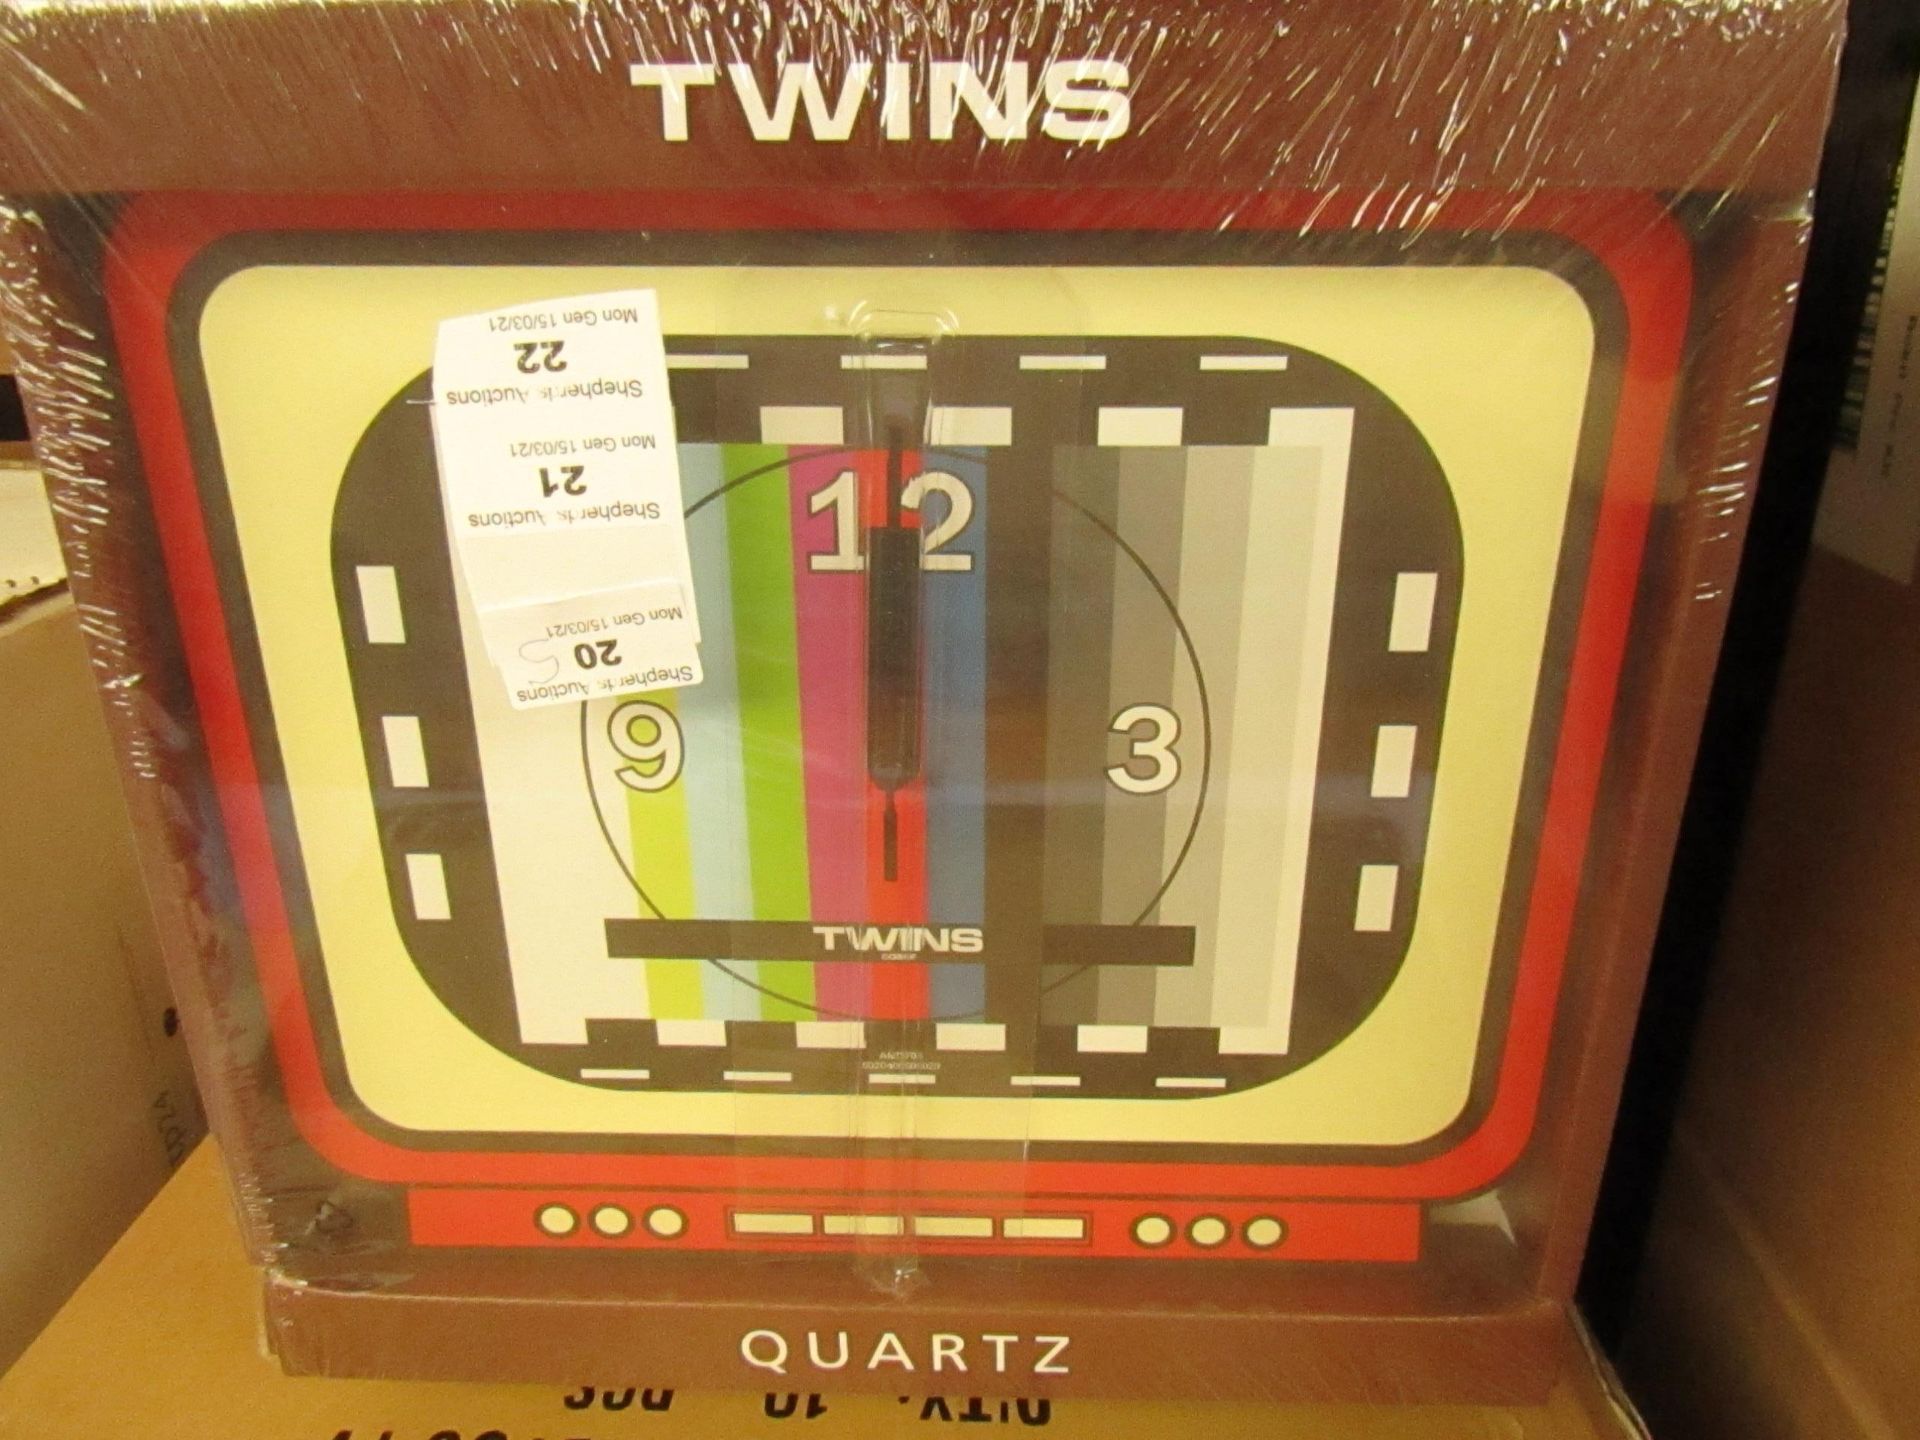 5x Twinz Quartz Wall Clock - New & Packaged (see image for design)